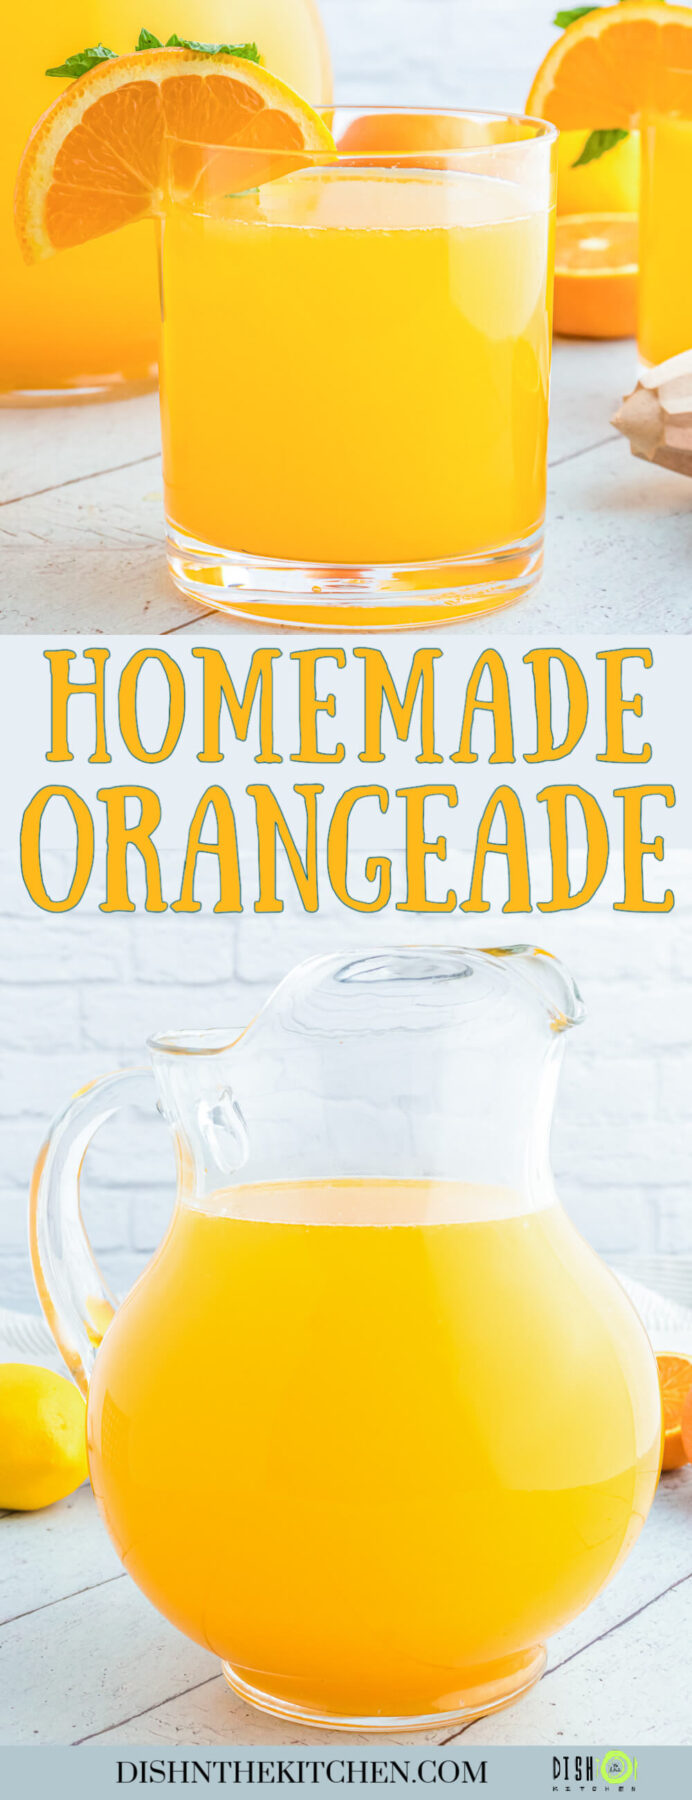 PInterest image of a pitcher and glass of bright homemade orangeade garnished with orange wheels and green sprigs of fresh mint.